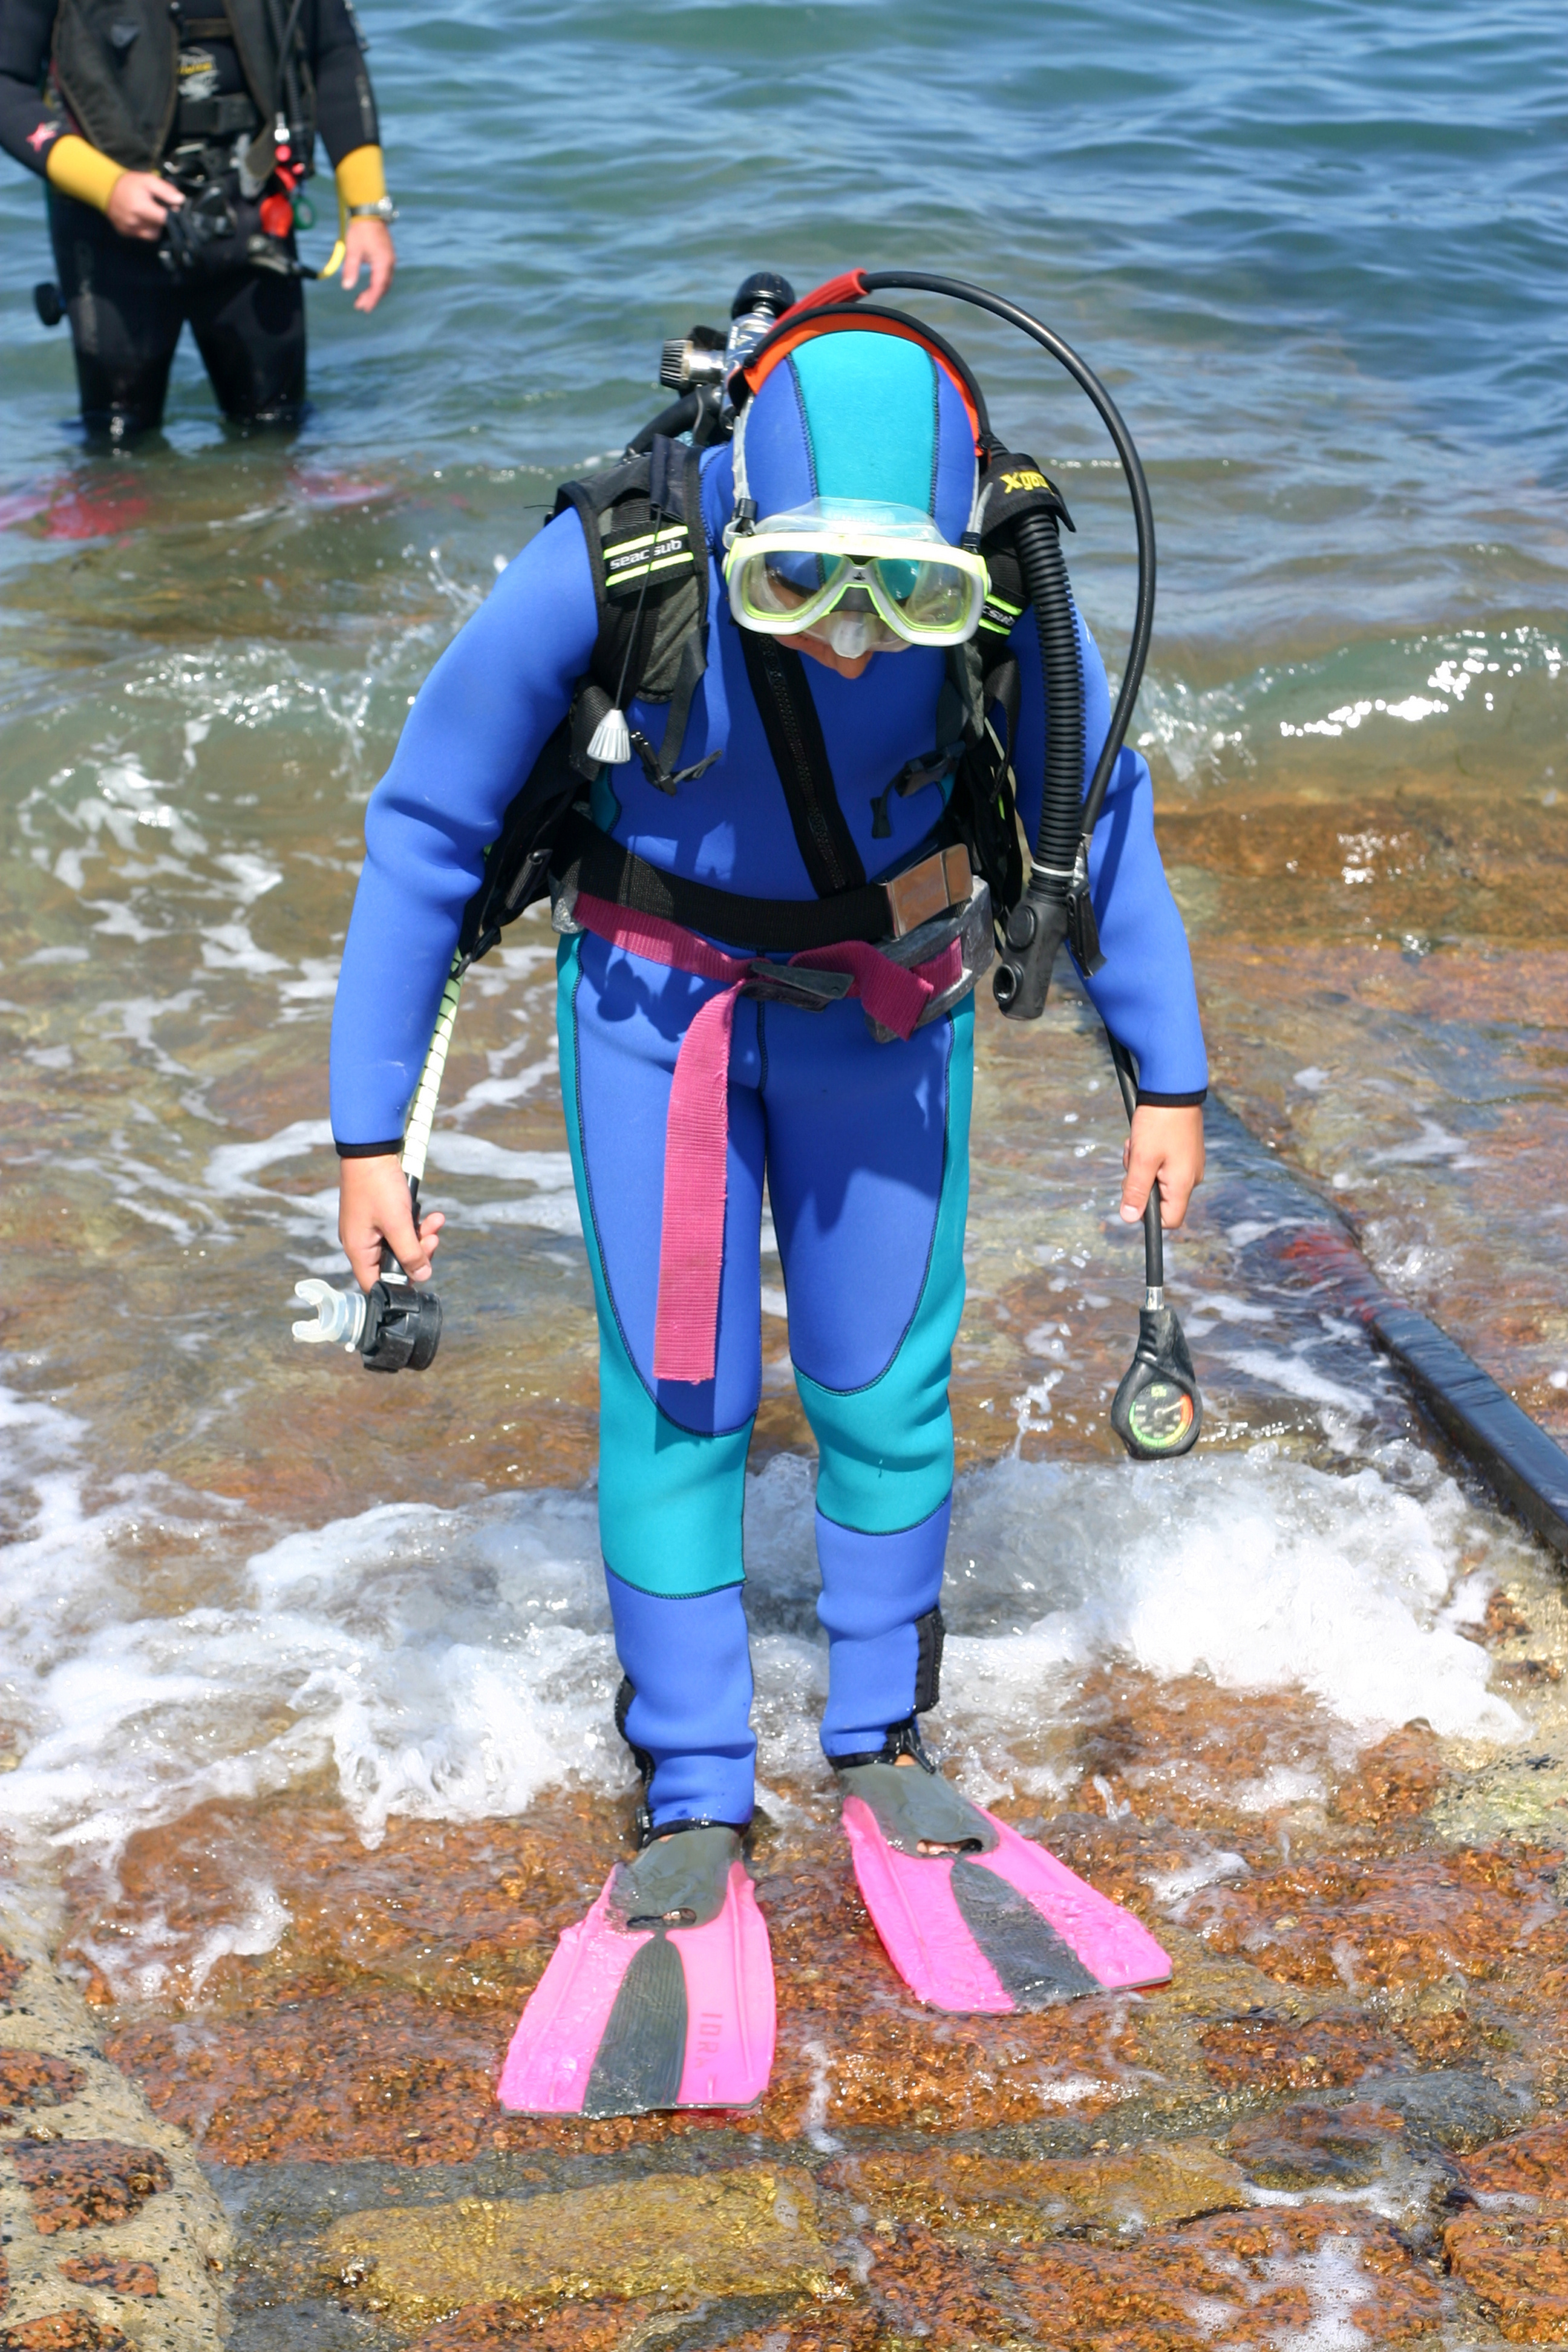 Scuba diver makes it back to shore safely after following best practices for water entries and water exits